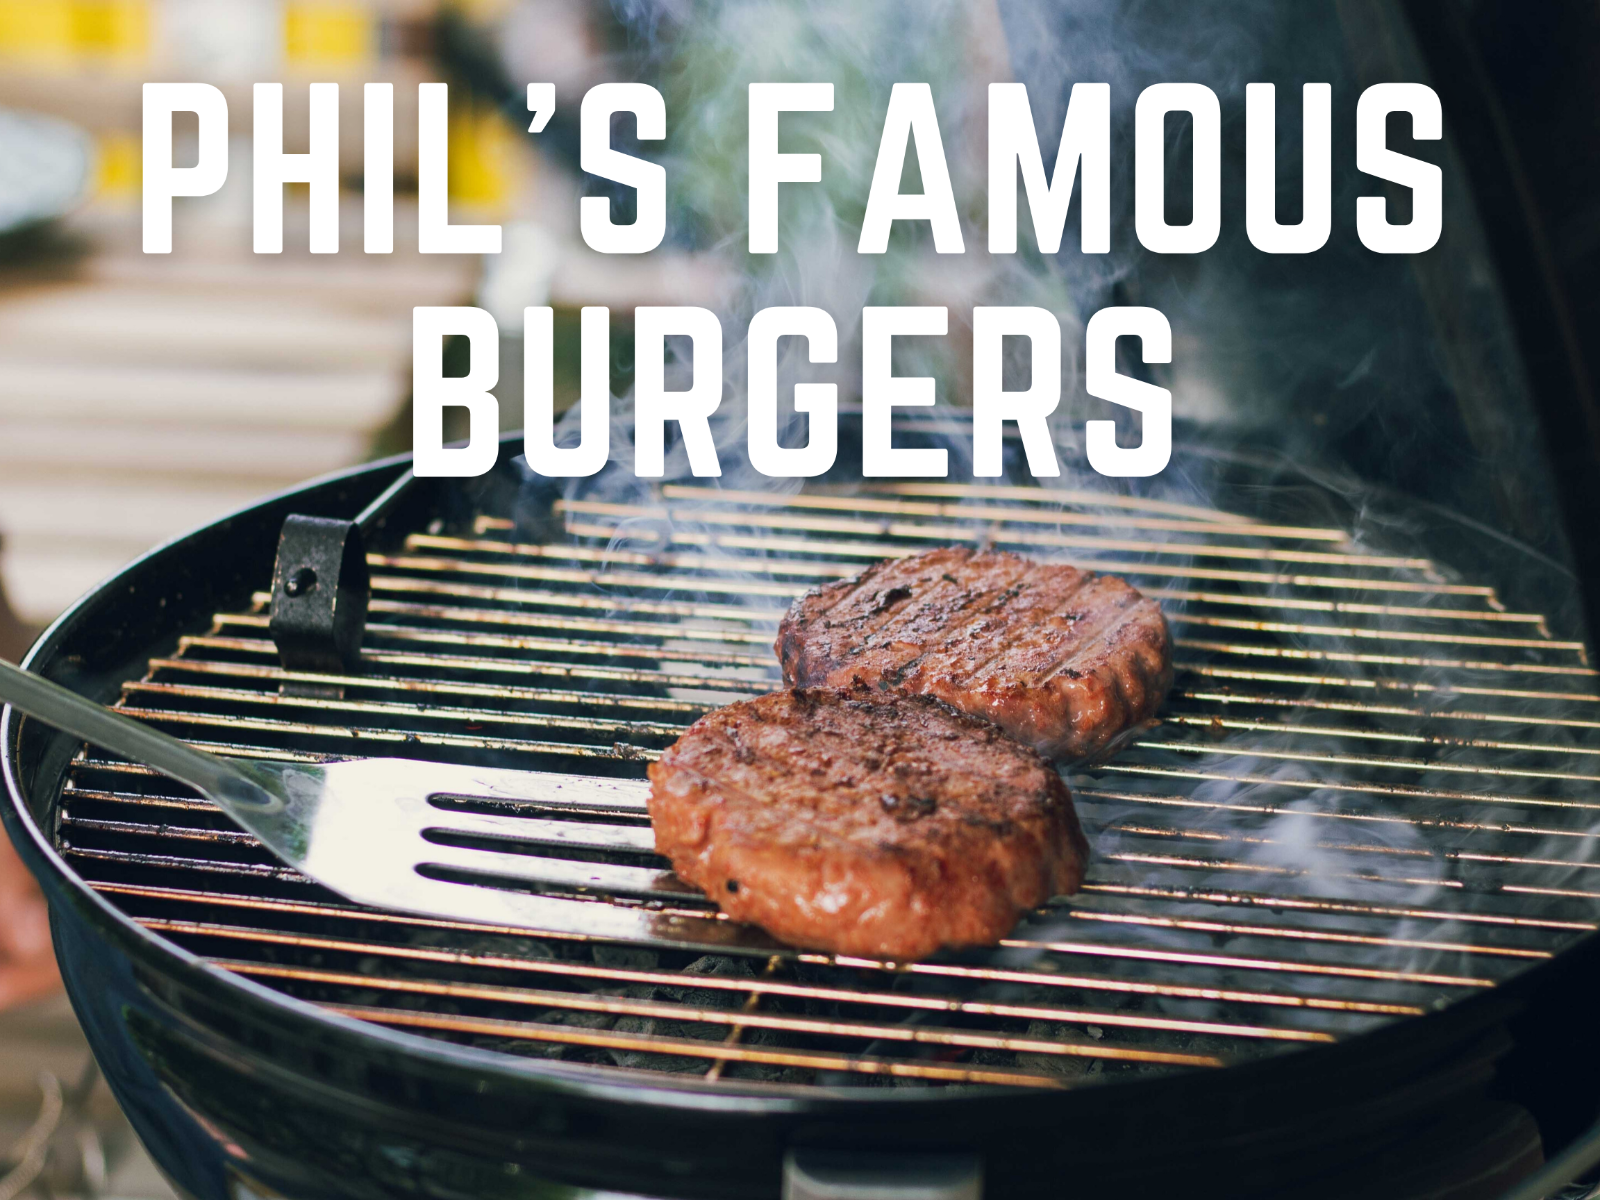 Fire Up The Grill With Phil!